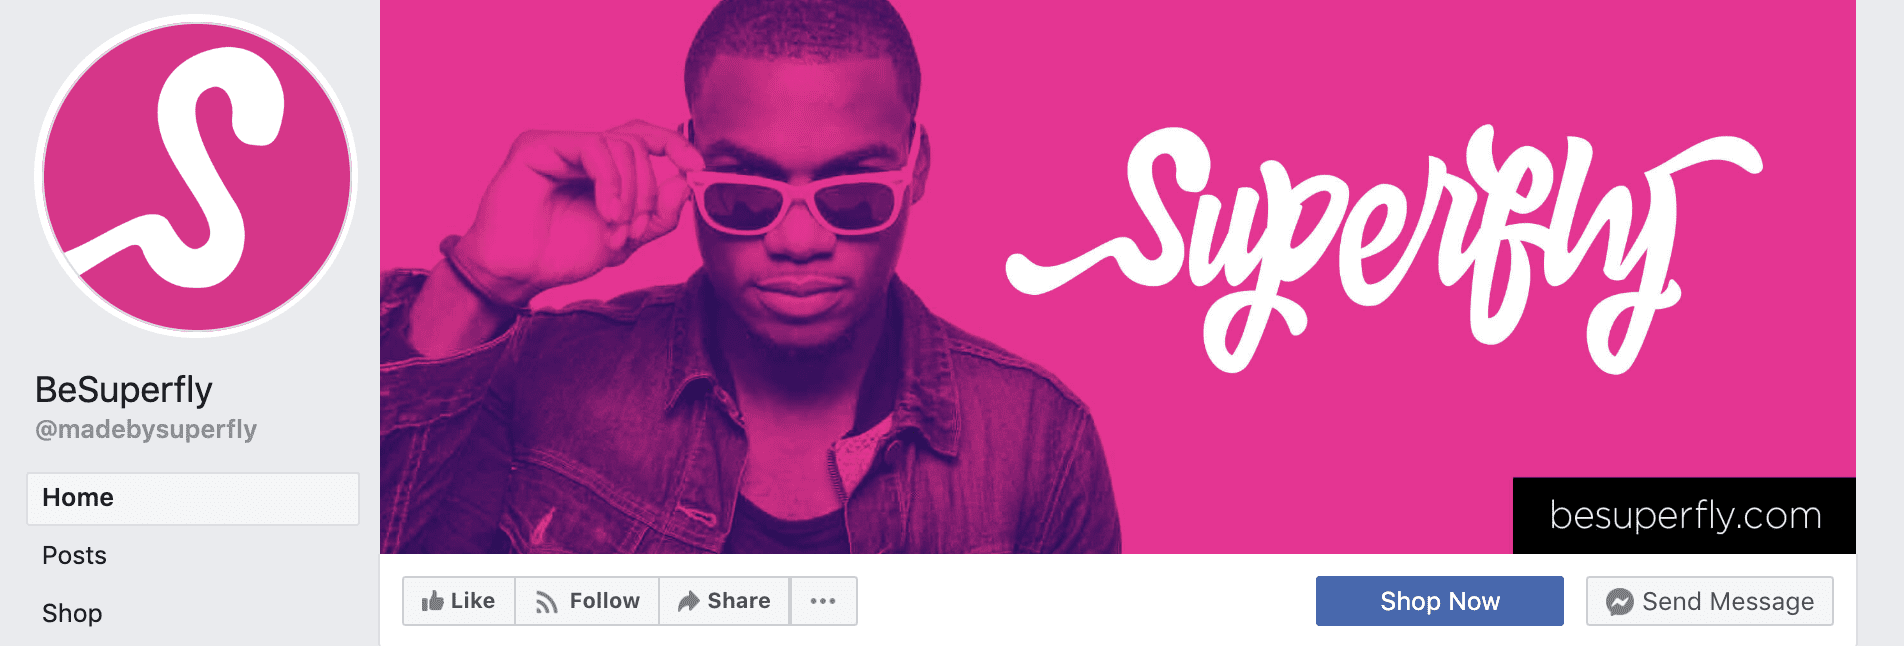 BeSuperfly Facebook Cover Photo